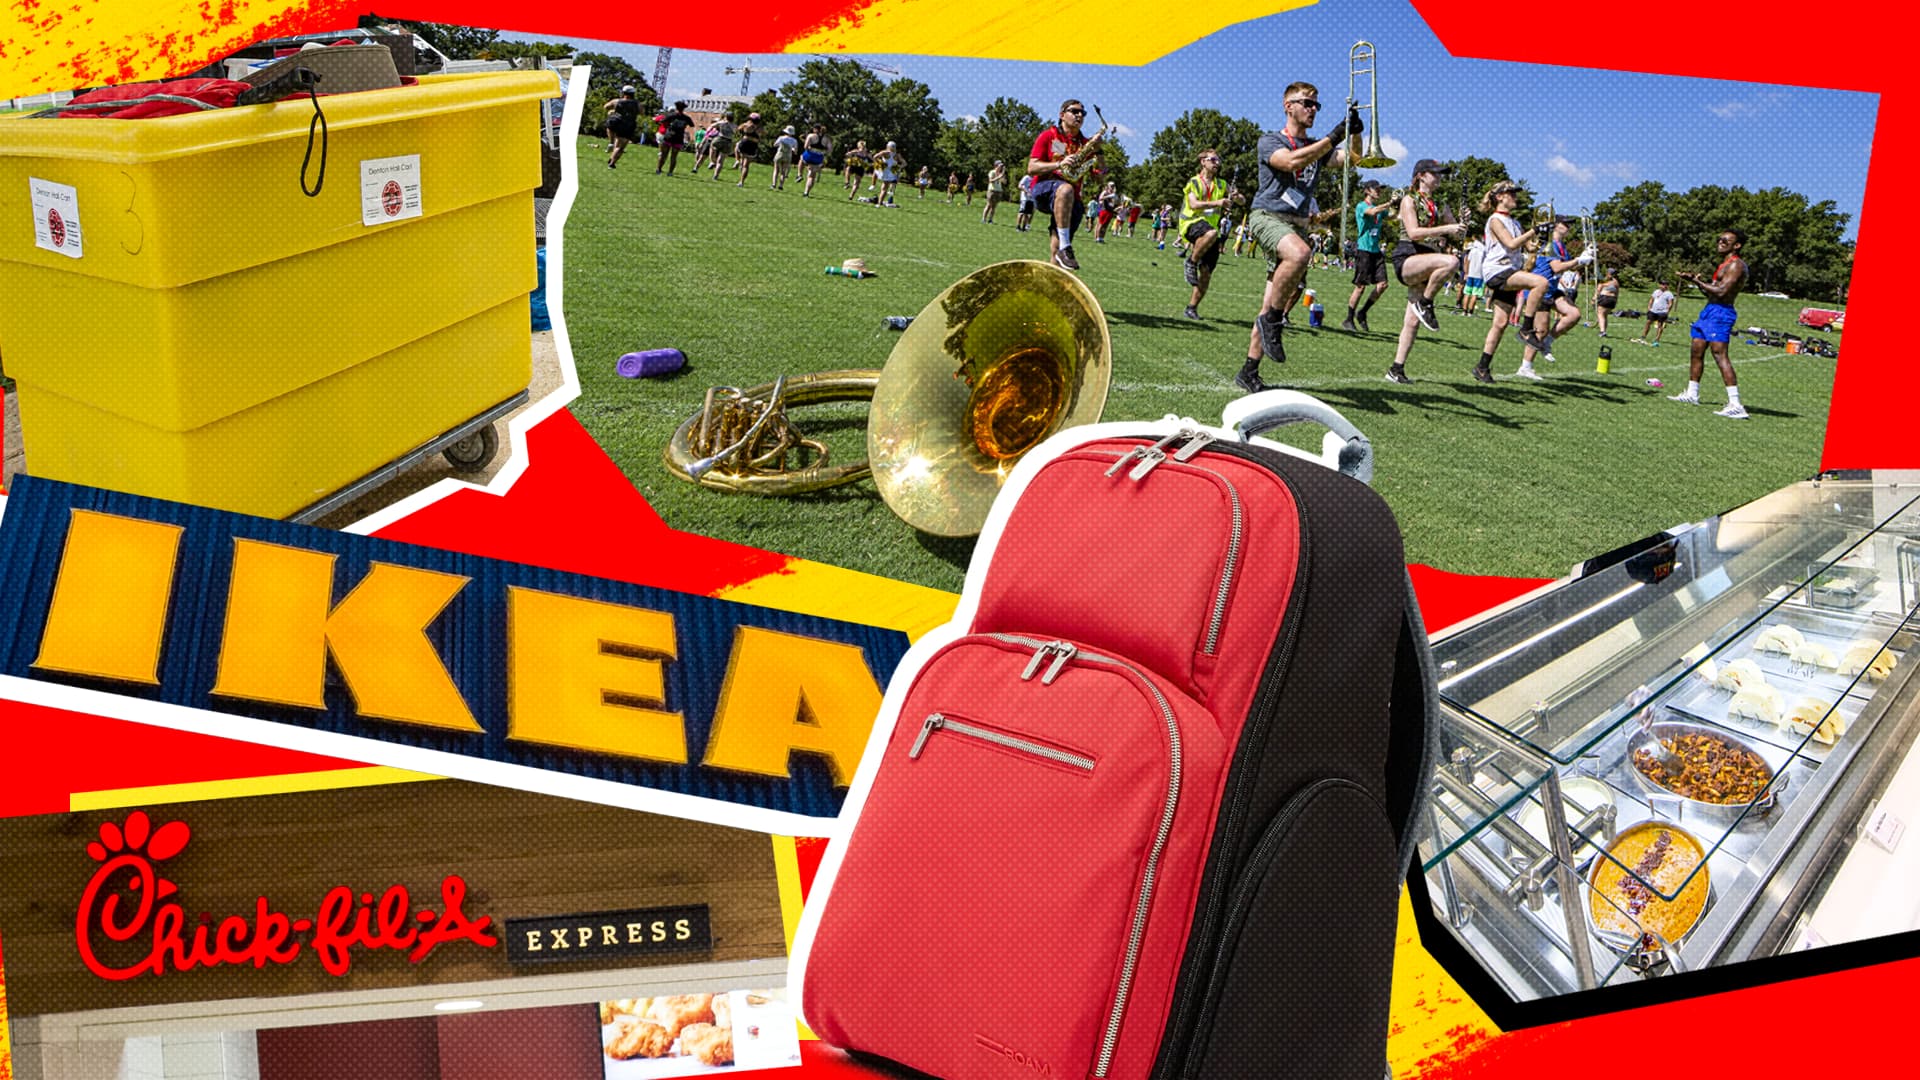 collage of yellow move-in cart, IKEA sign, Chick-fil-A sign, red backpack, marching band practice and dining hall spread